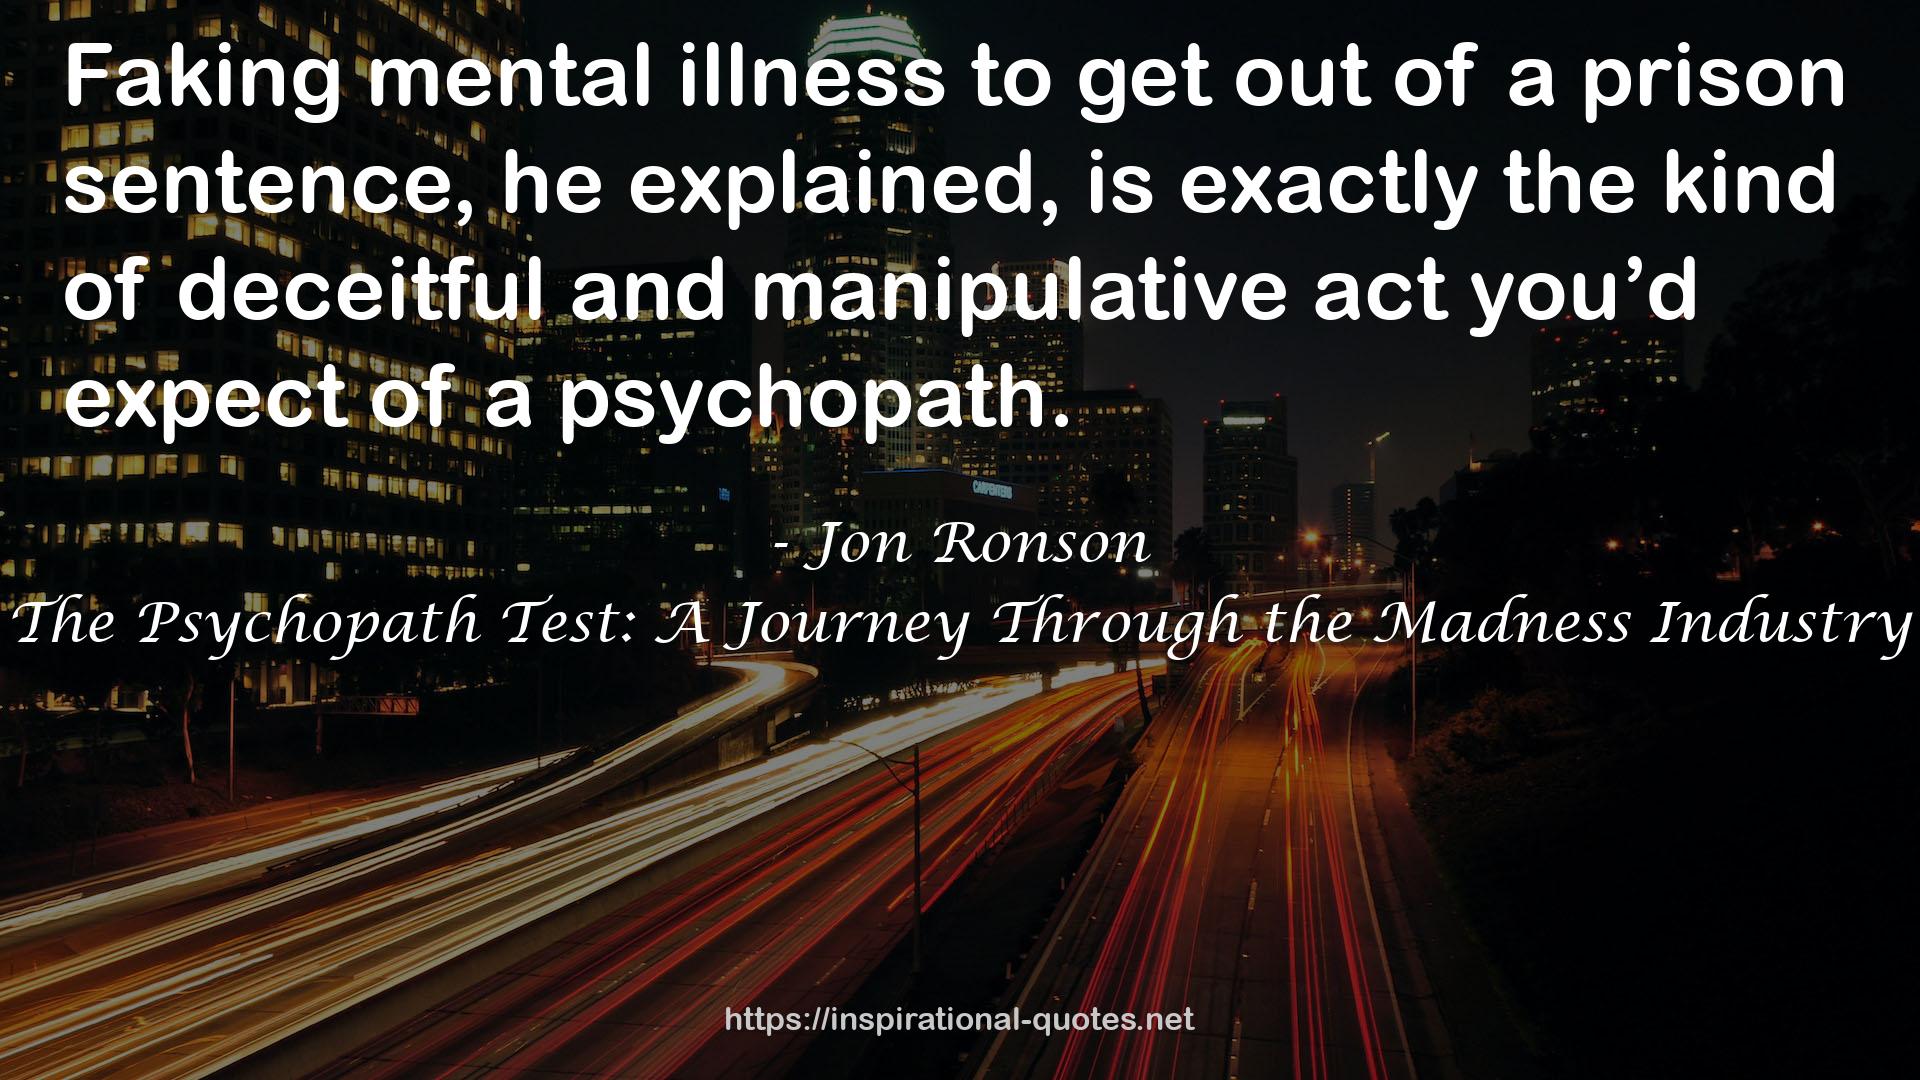 The Psychopath Test: A Journey Through the Madness Industry QUOTES